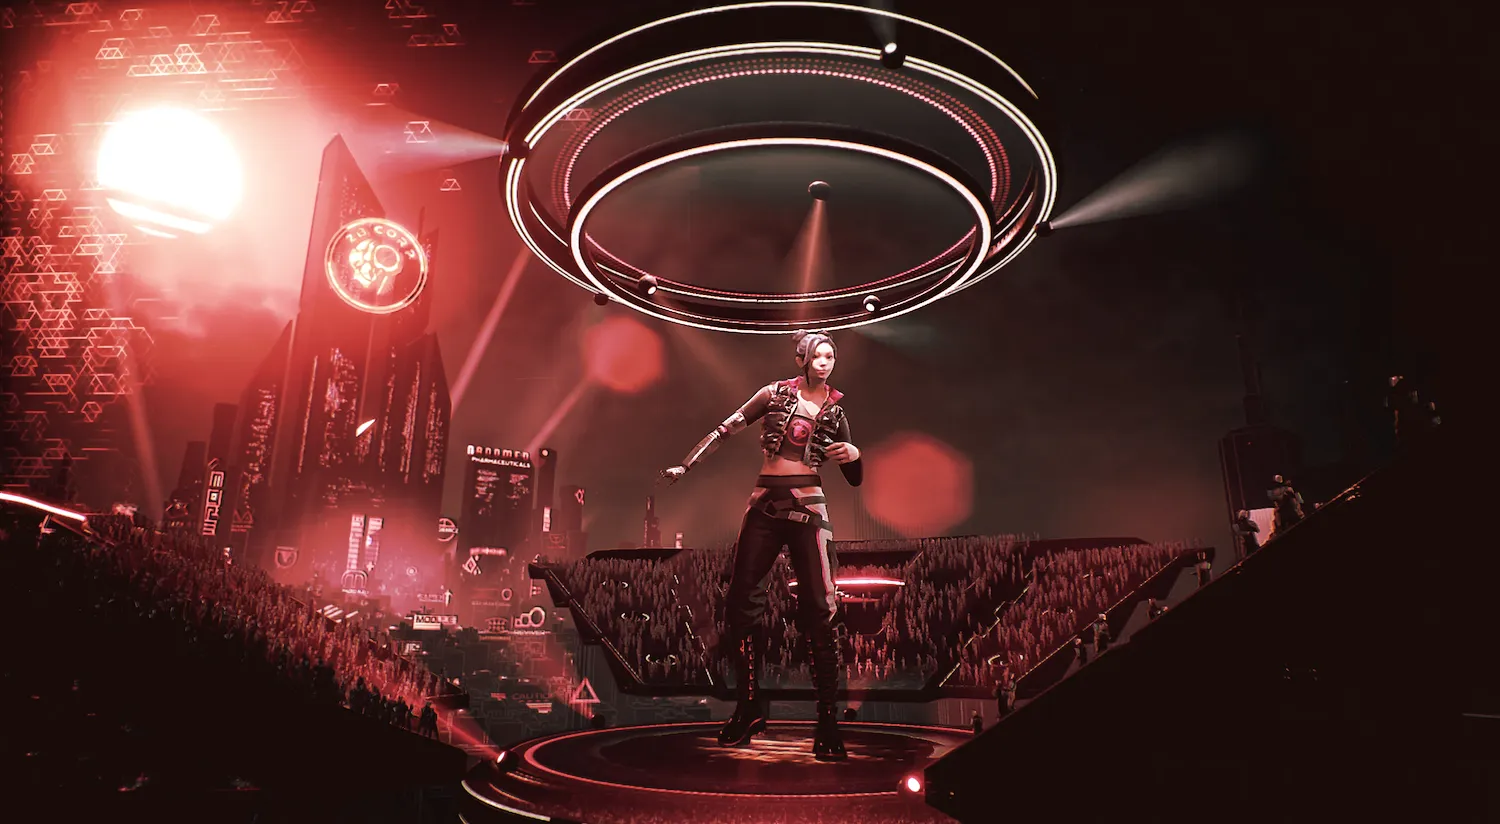 Improbable's M² is building tech for the metaverse, including concerts. Image: Improbable